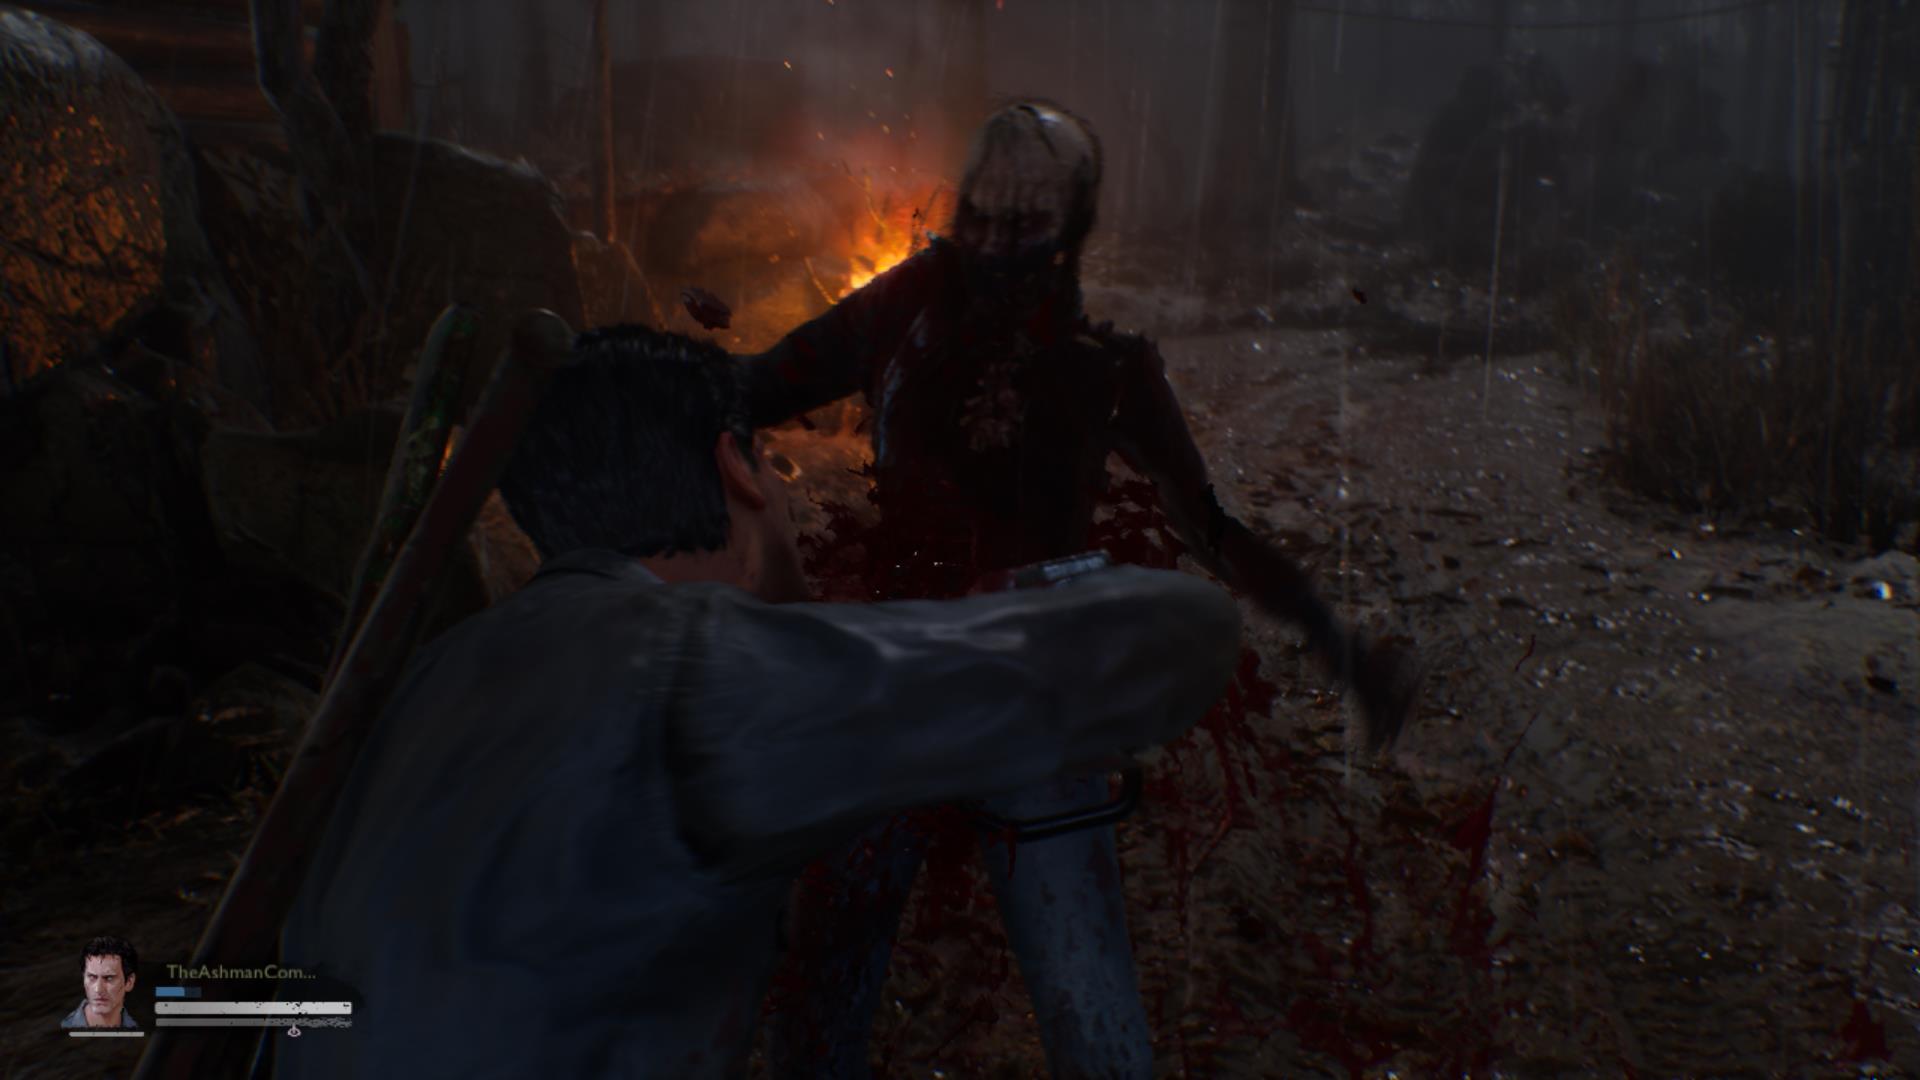 Evil Dead: The Game Review –